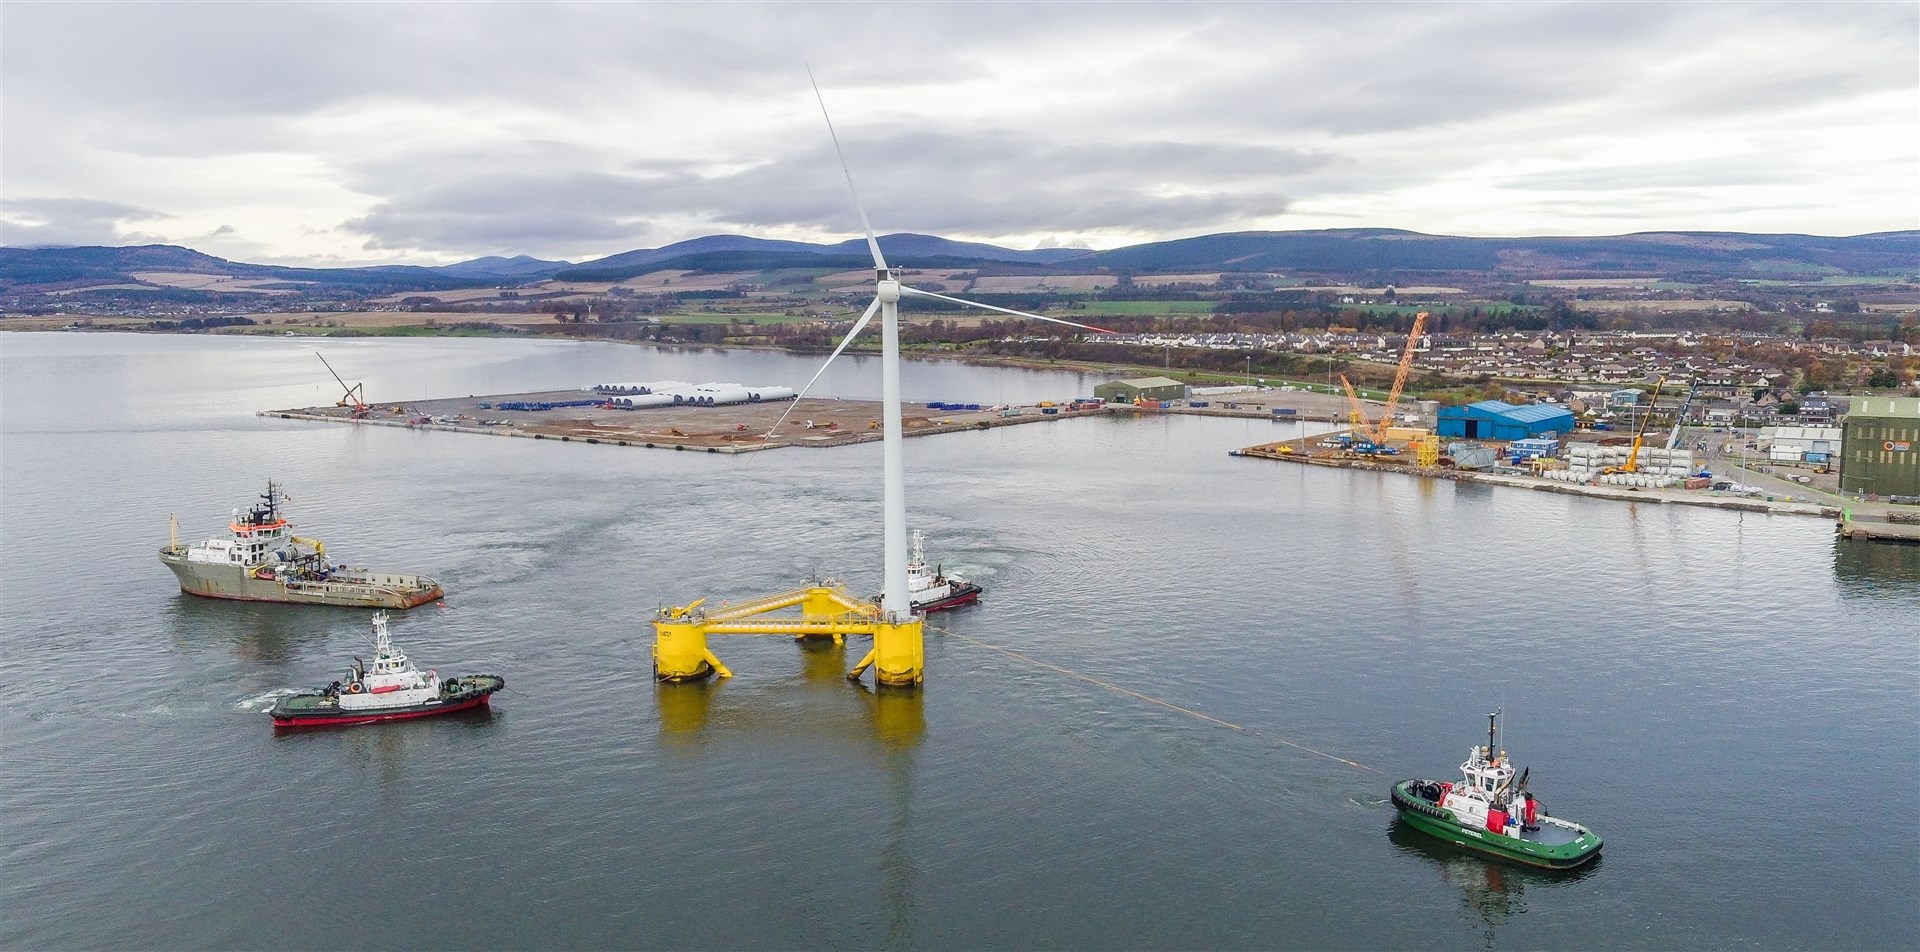 Port of Cromarty Firth has taken a lead role in the Opportunity Cromarty Firth partnership. Image by: Malcolm McCurrach | © Malcolm McCurrach 2020